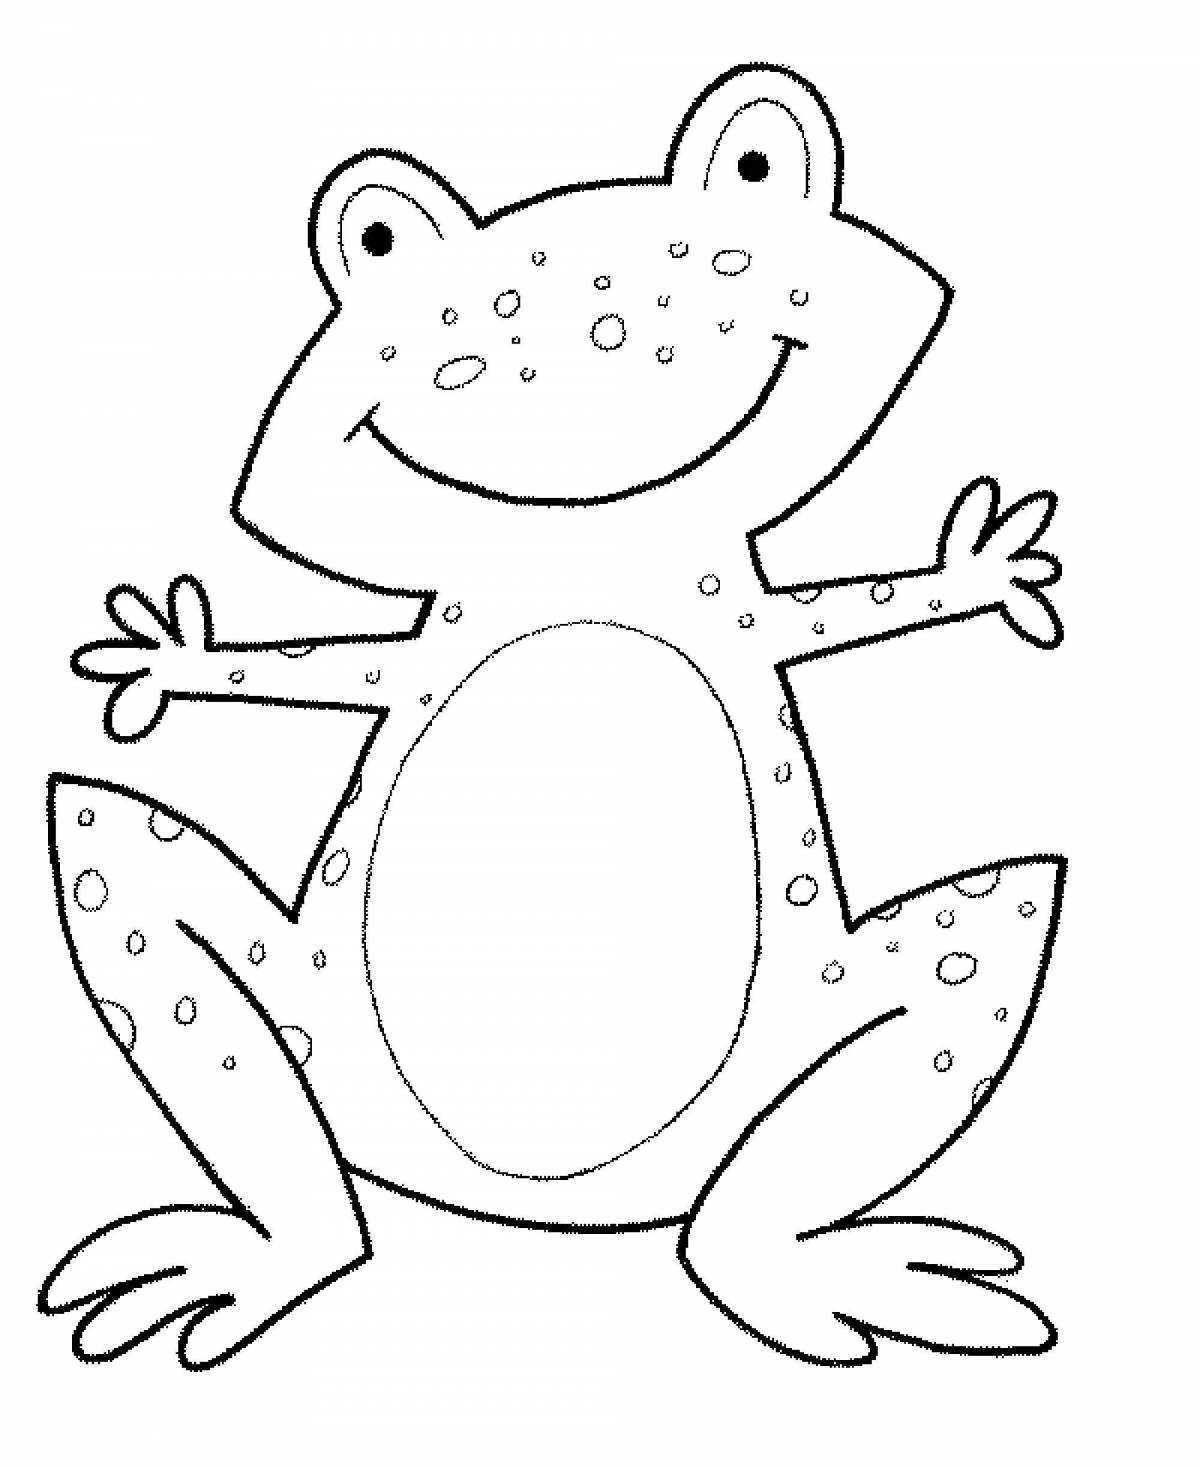 Fairy frog coloring page